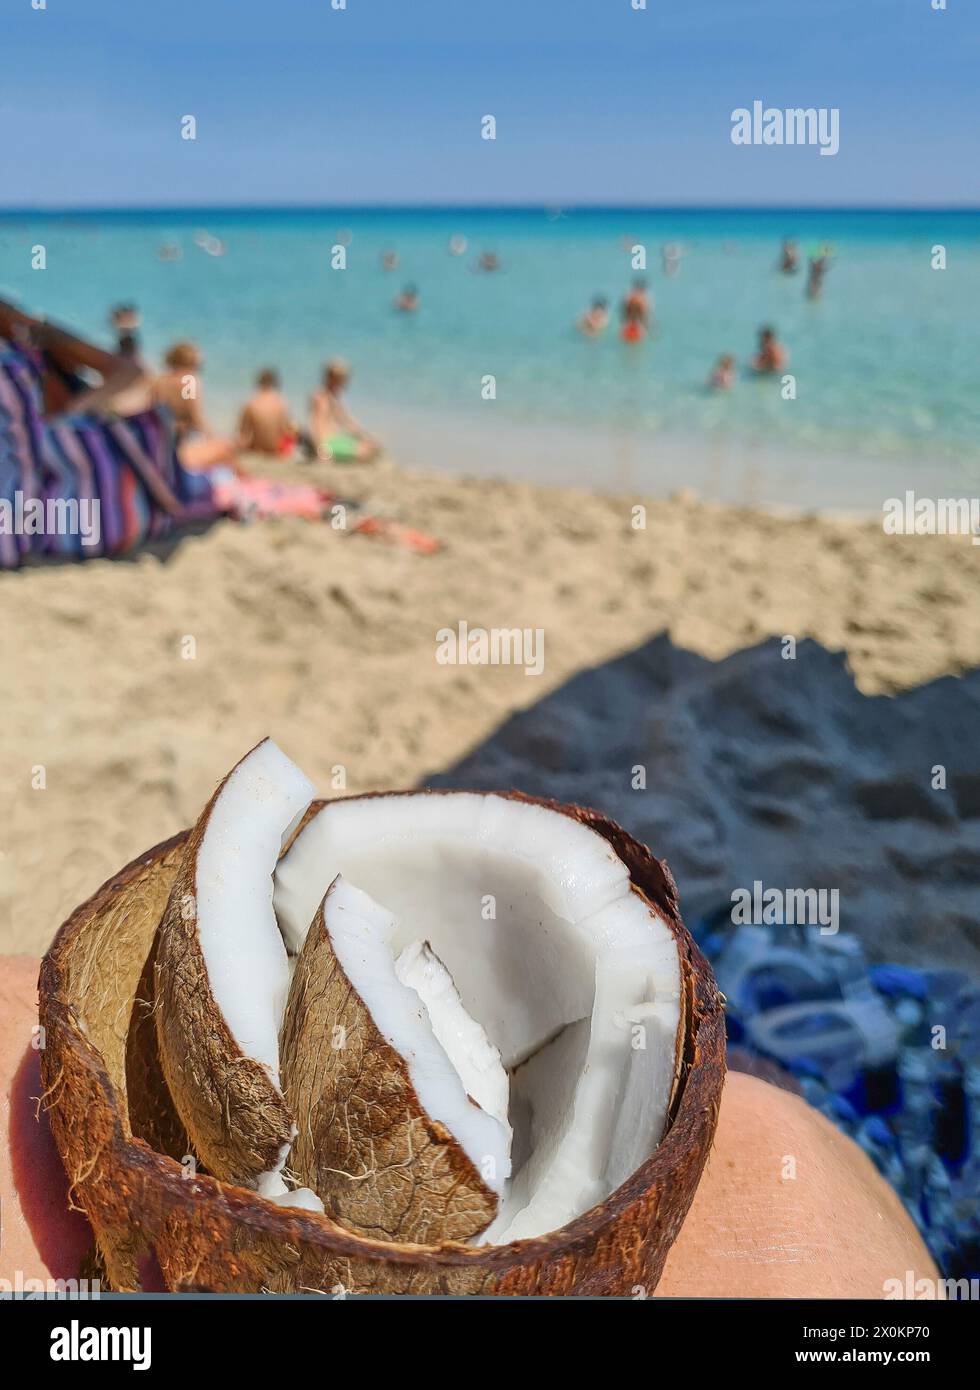 An open coconut with shell in the foreground, typical snack on the beach during a summer vacation in Mallorca, Spain Stock Photo